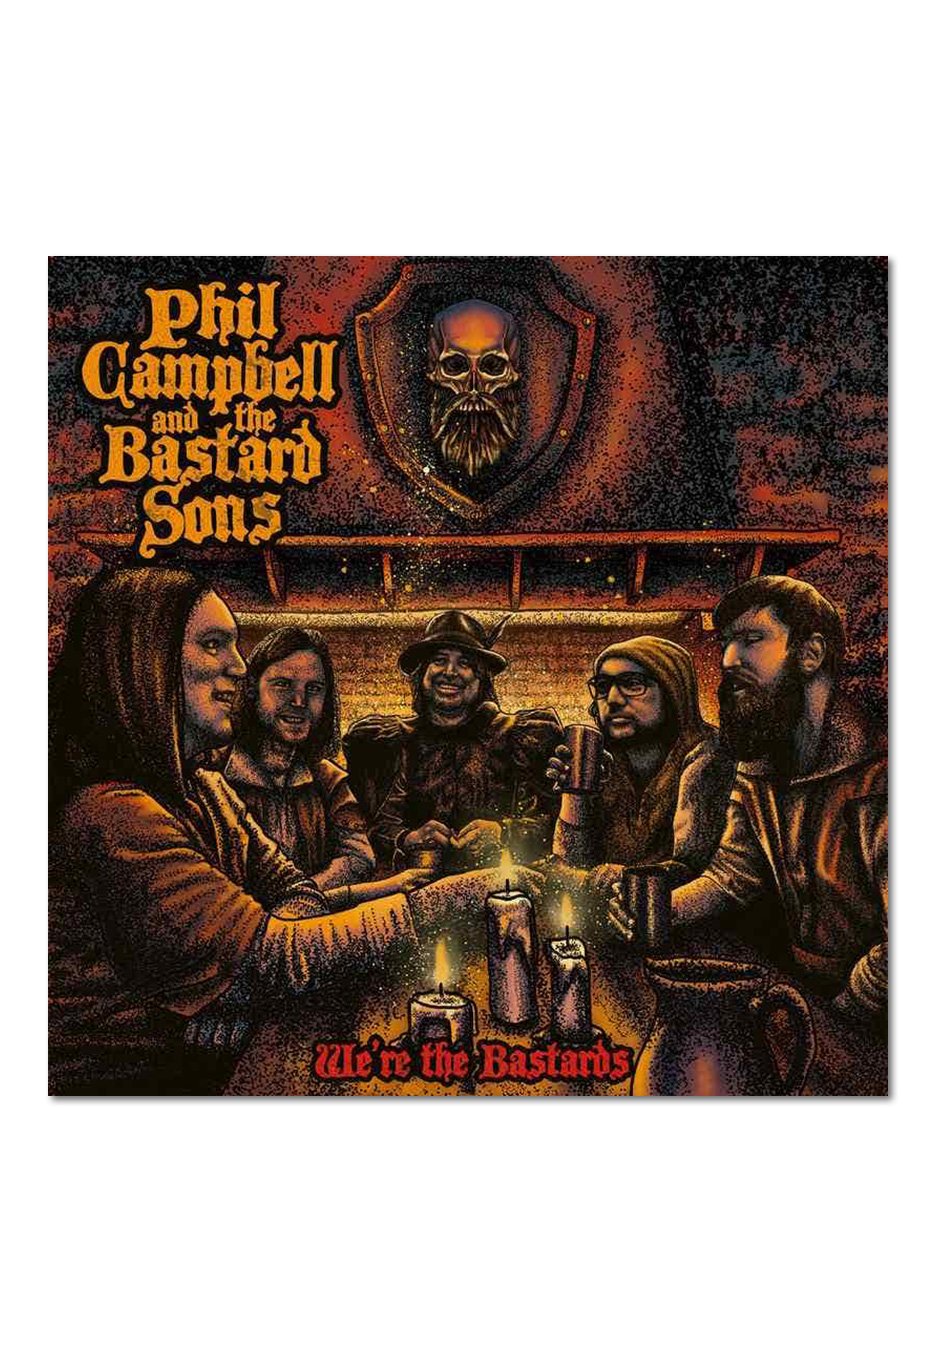 Phil Campbell And The Bastard Sons - We're The Bastards - CD